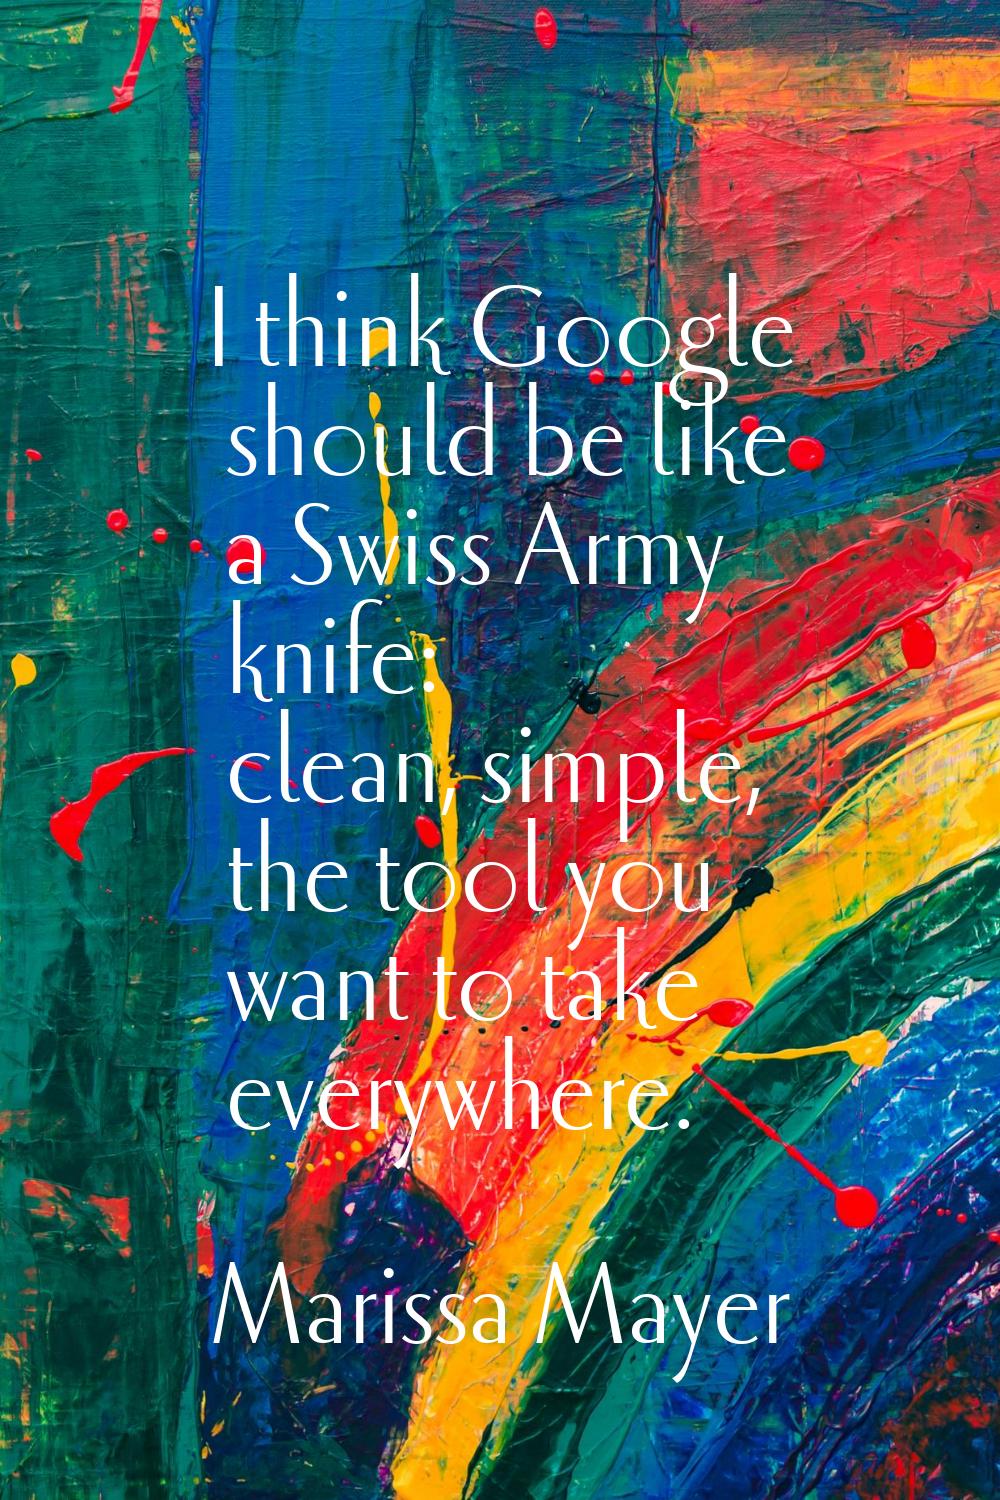 I think Google should be like a Swiss Army knife: clean, simple, the tool you want to take everywhe